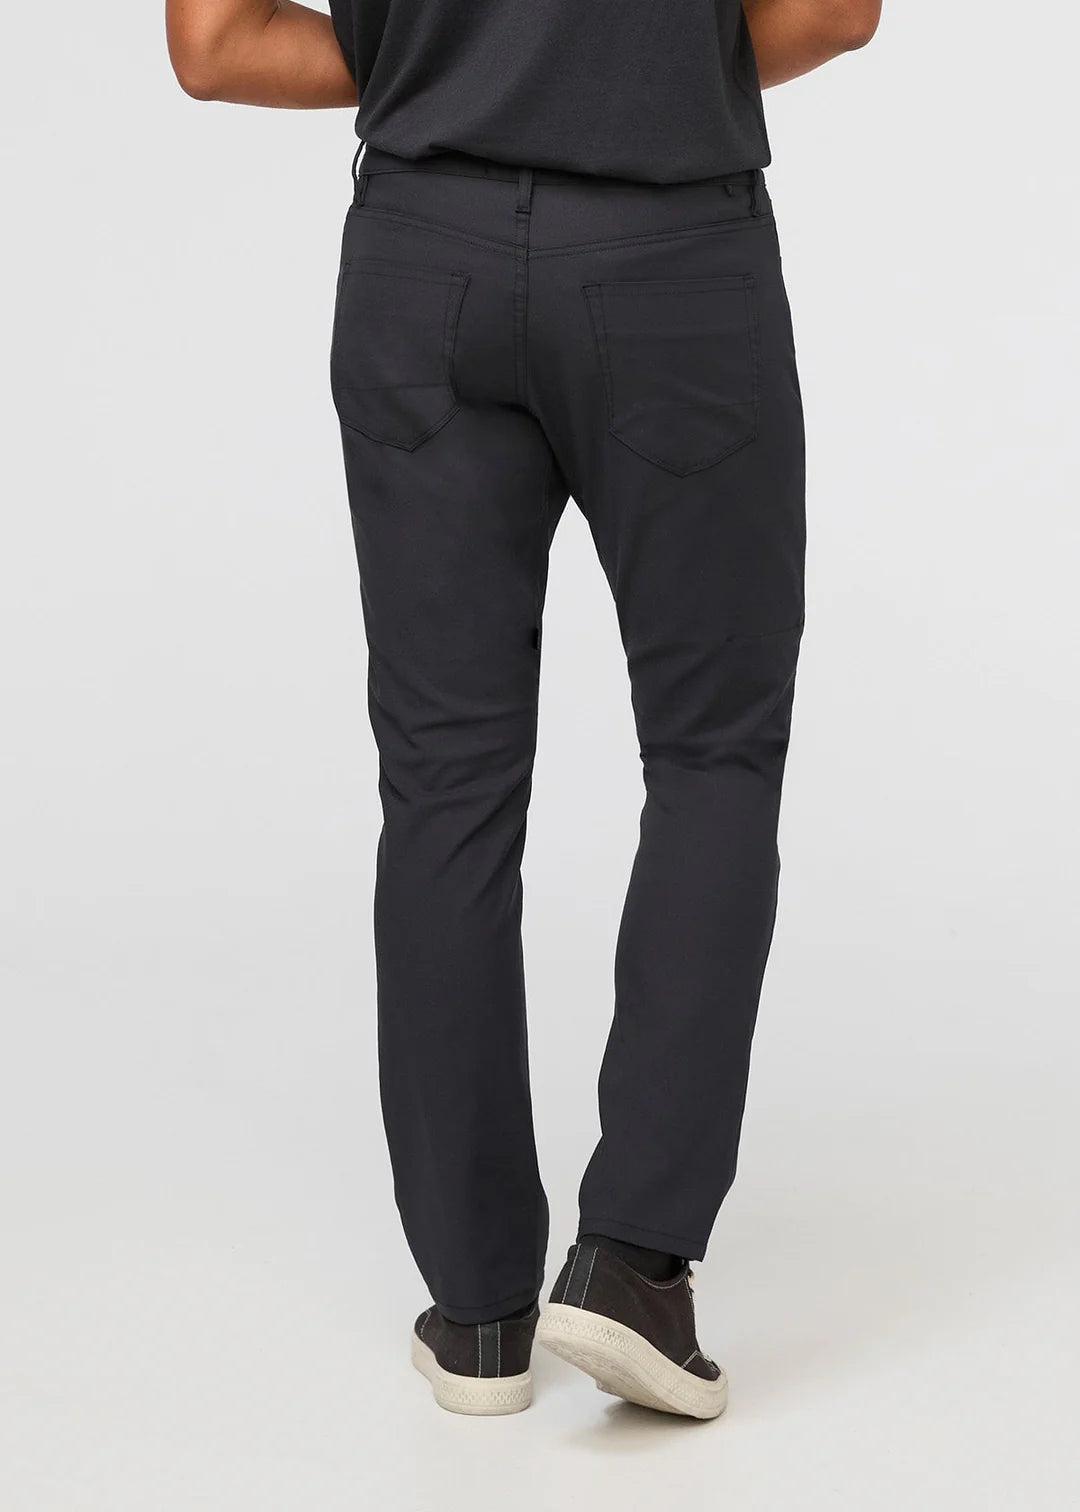 Back view of DUER's NuStretch Relaxed 5-Pocket Pant in the color Black